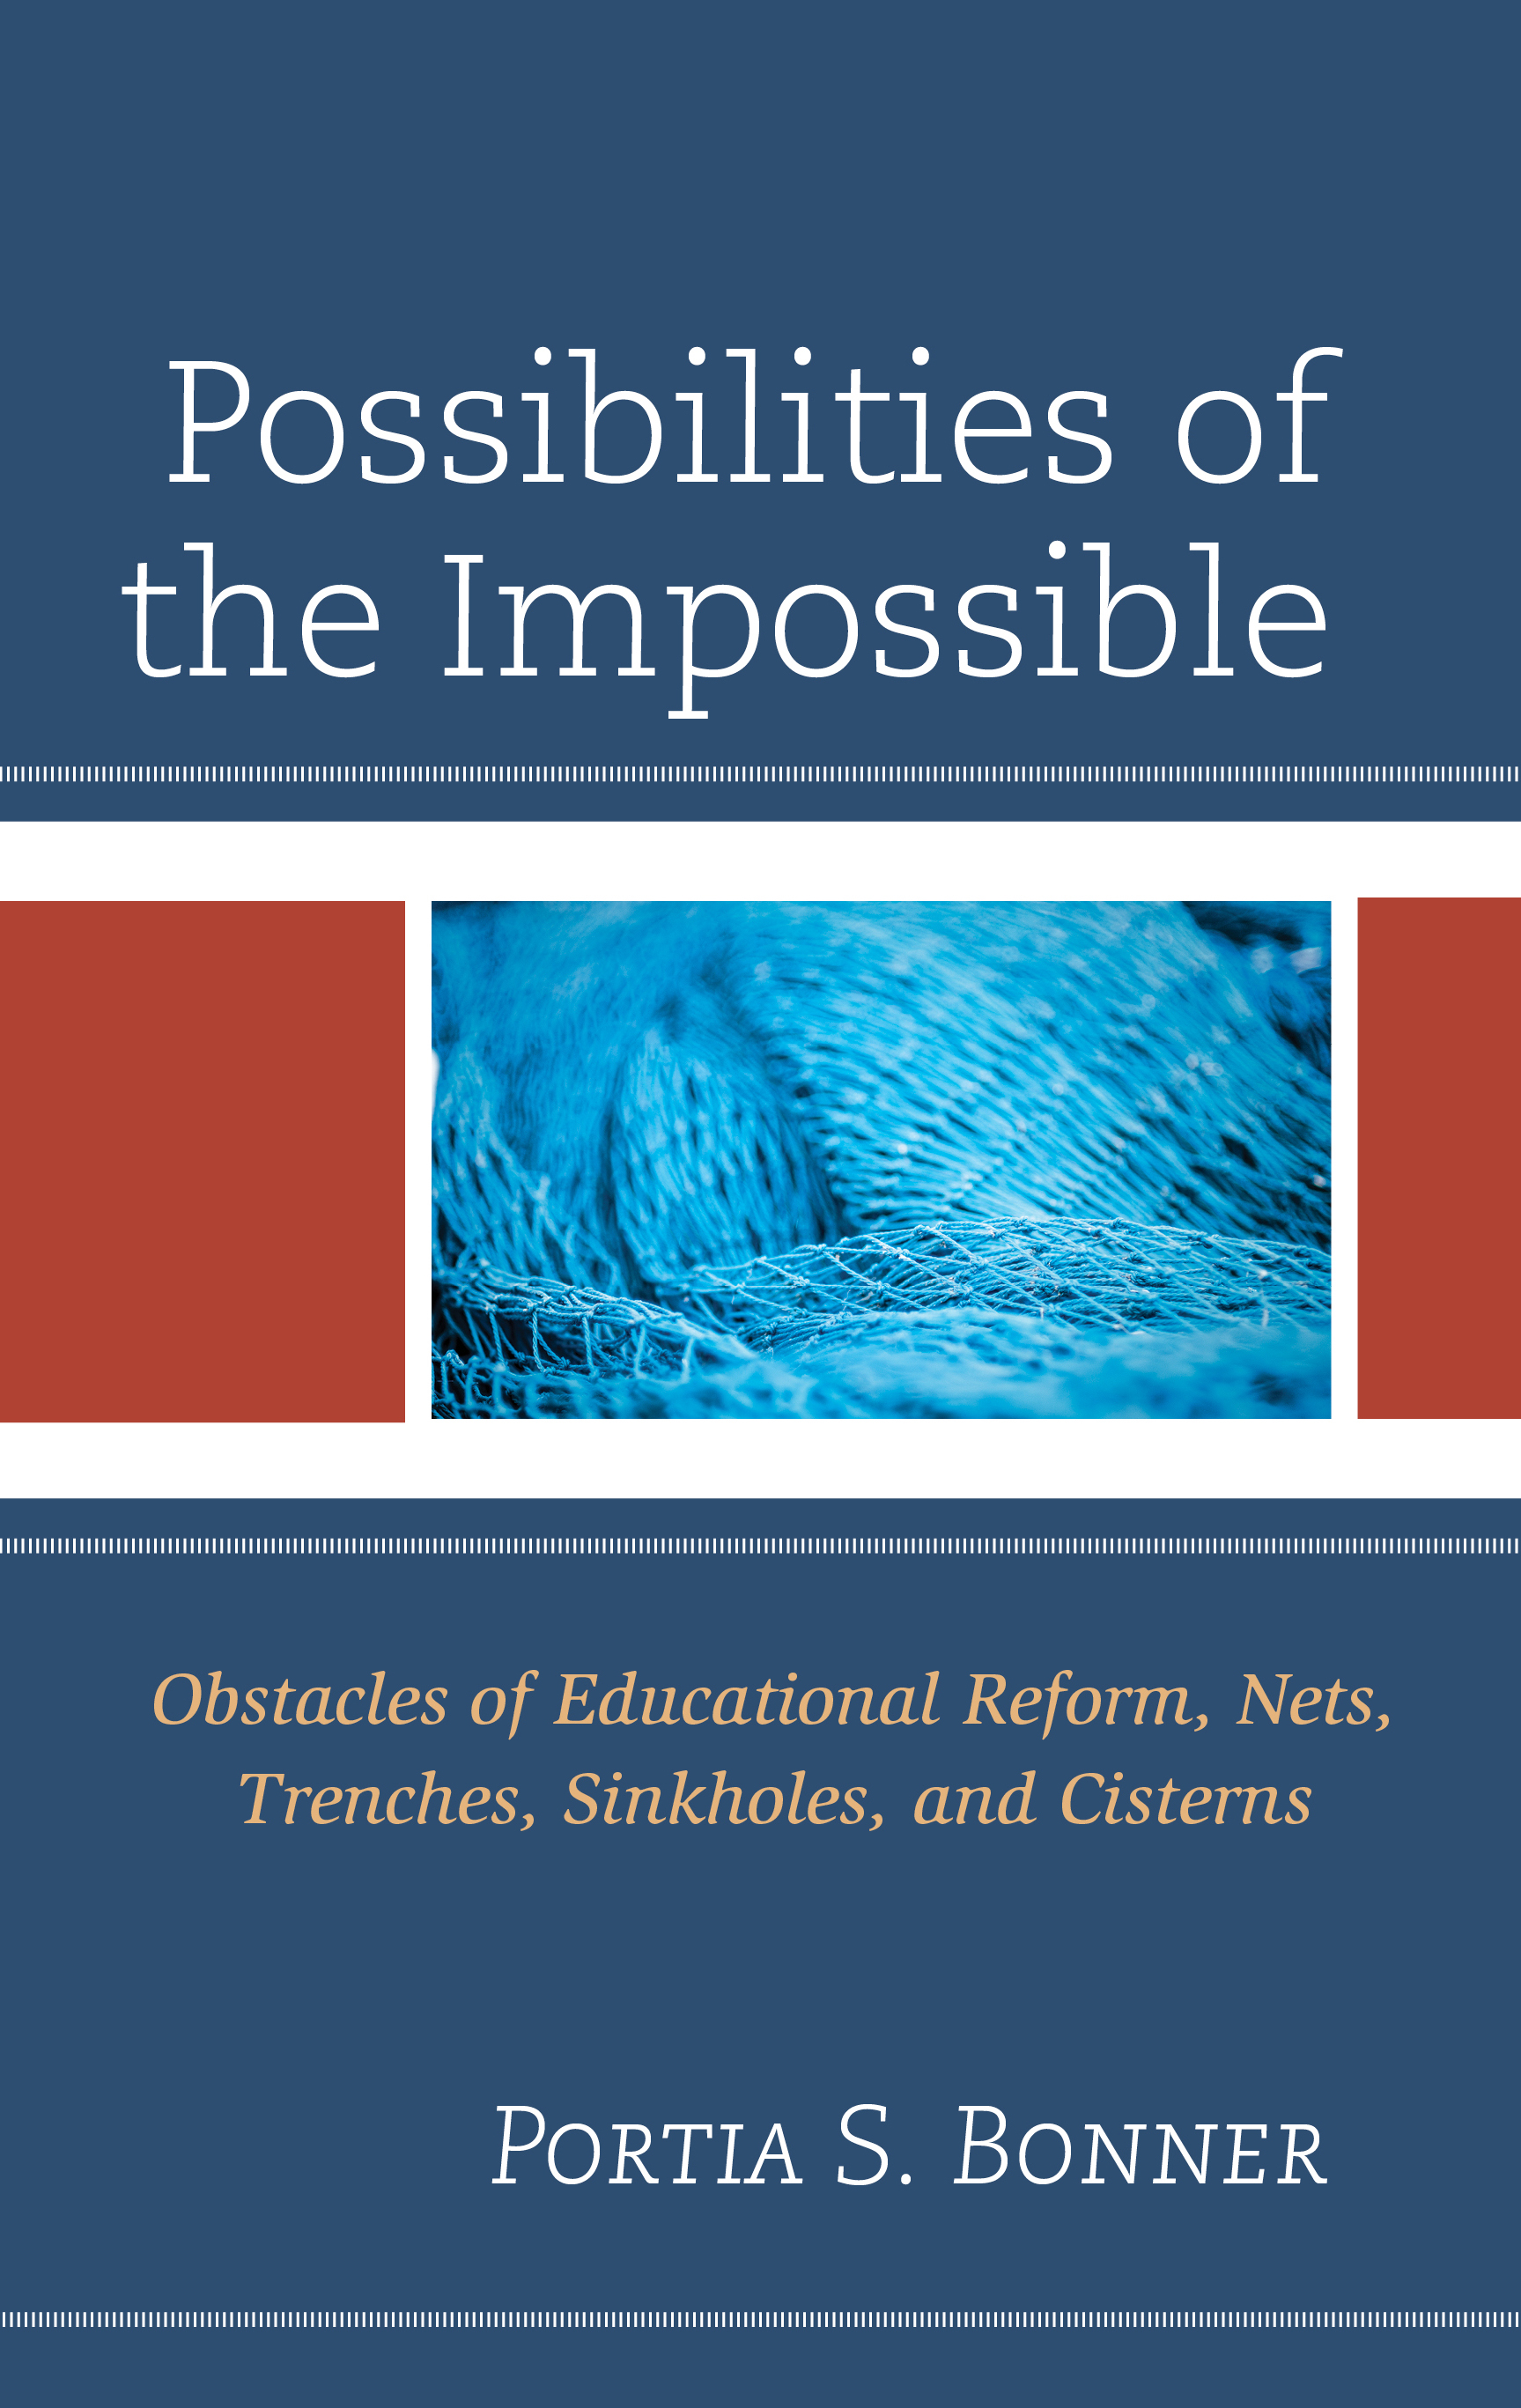 Possibilities of the Impossible: Obstacles of Educational Reform, Nets, Trenches, Sinkholes and Cisterns